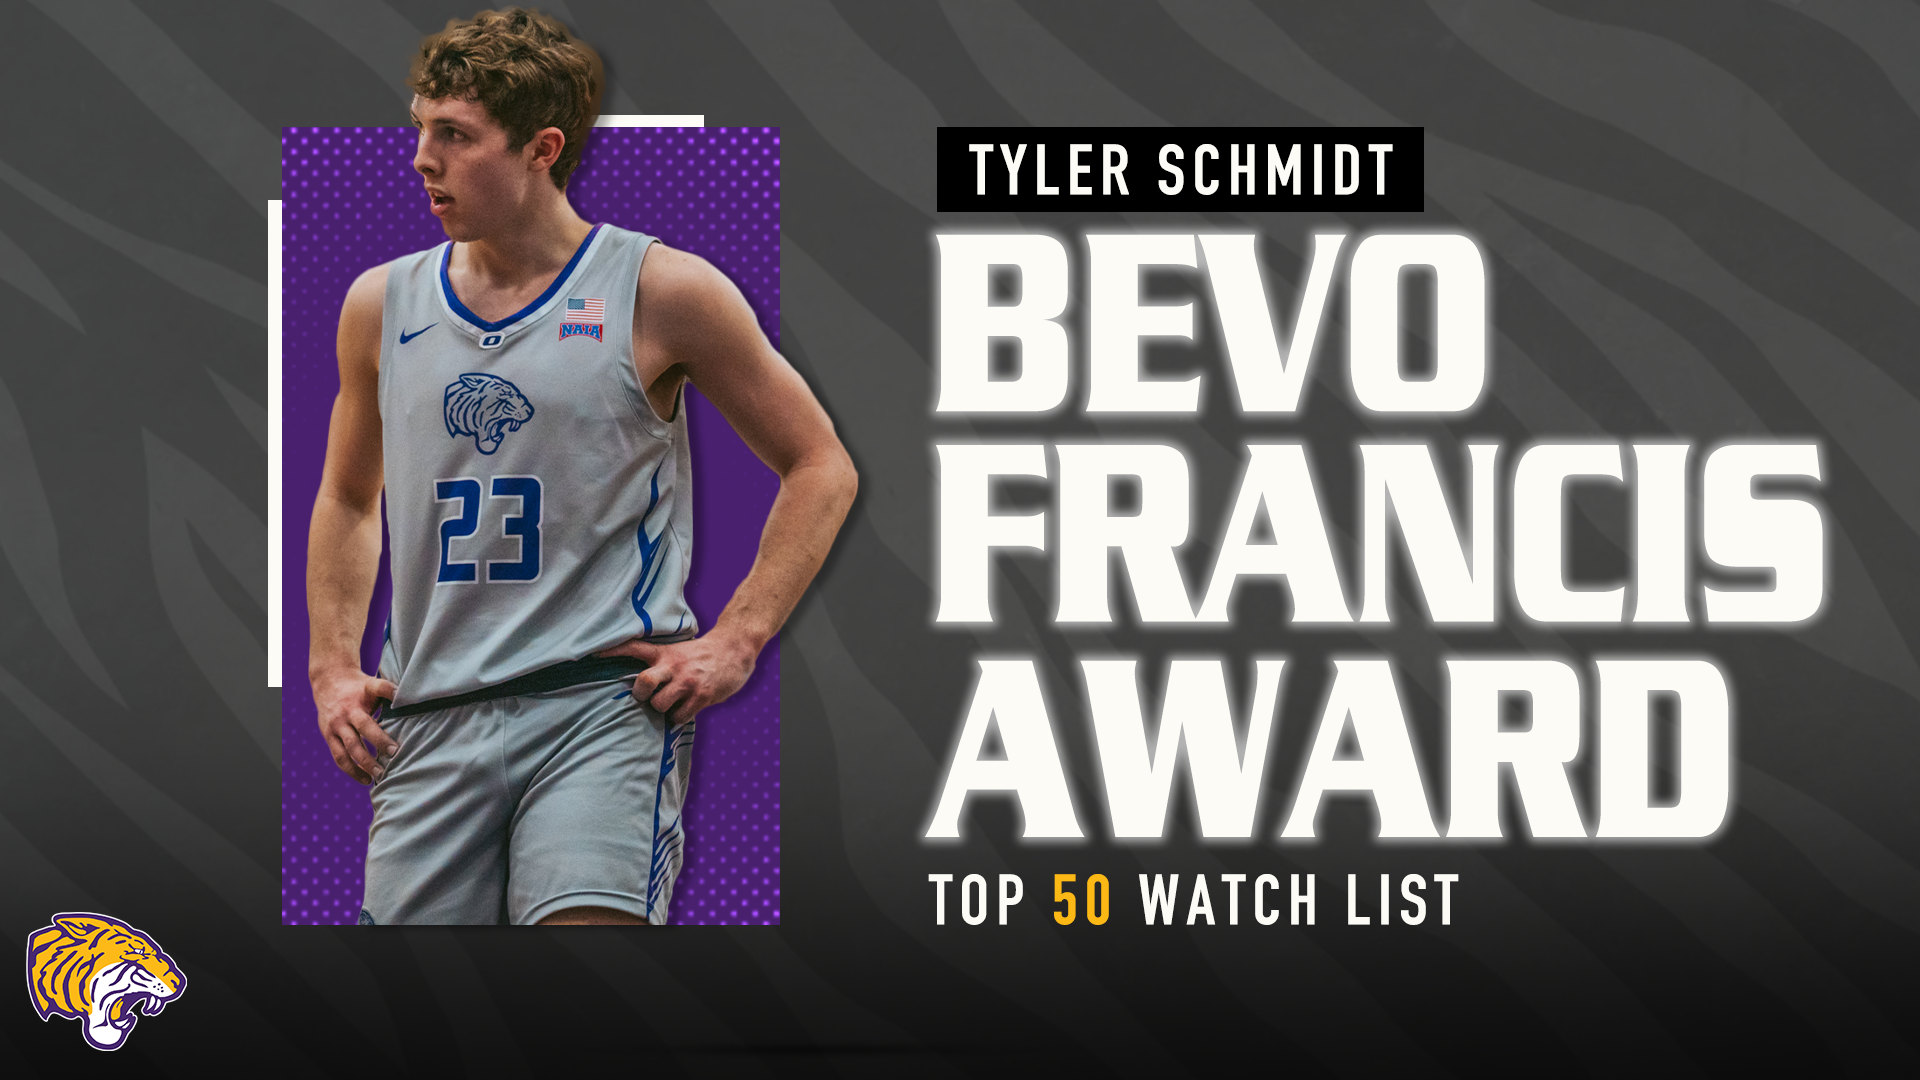 SCHMIDT MAKES THE FIRST CUT; NAMED TO BEVO FRANCIS TOP 50 WATCH LIST